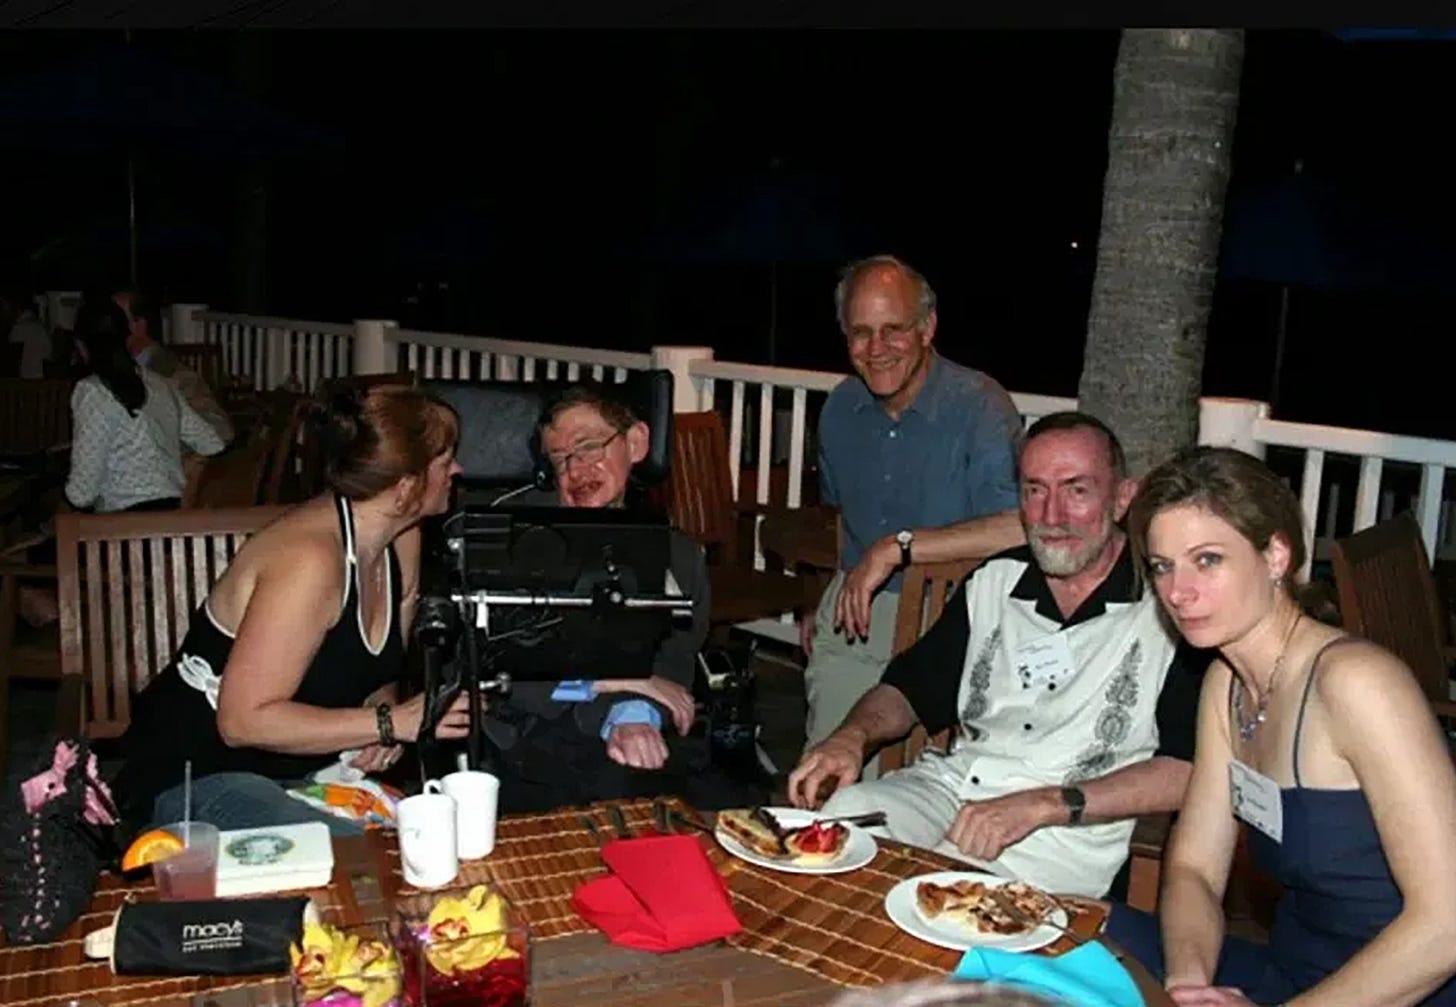 Stephen Hawking at a barbecue on Jeffrey Epstein’s Caribbean island in March 2006